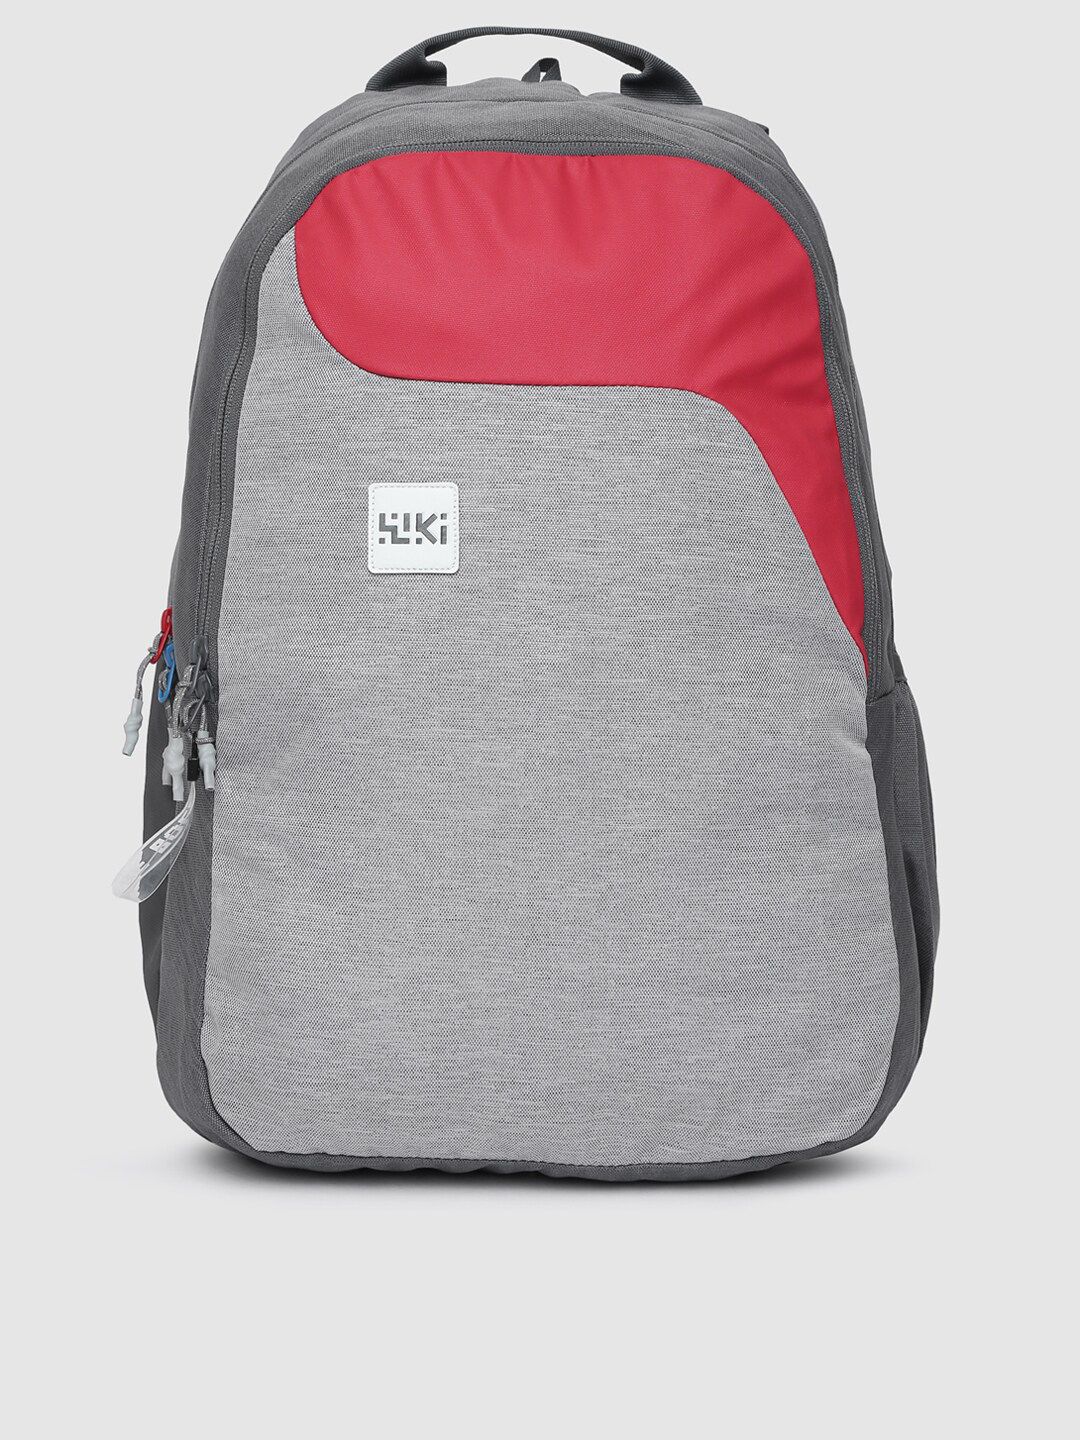 Wildcraft Unisex Grey & Red Colourblocked Backpack Price in India